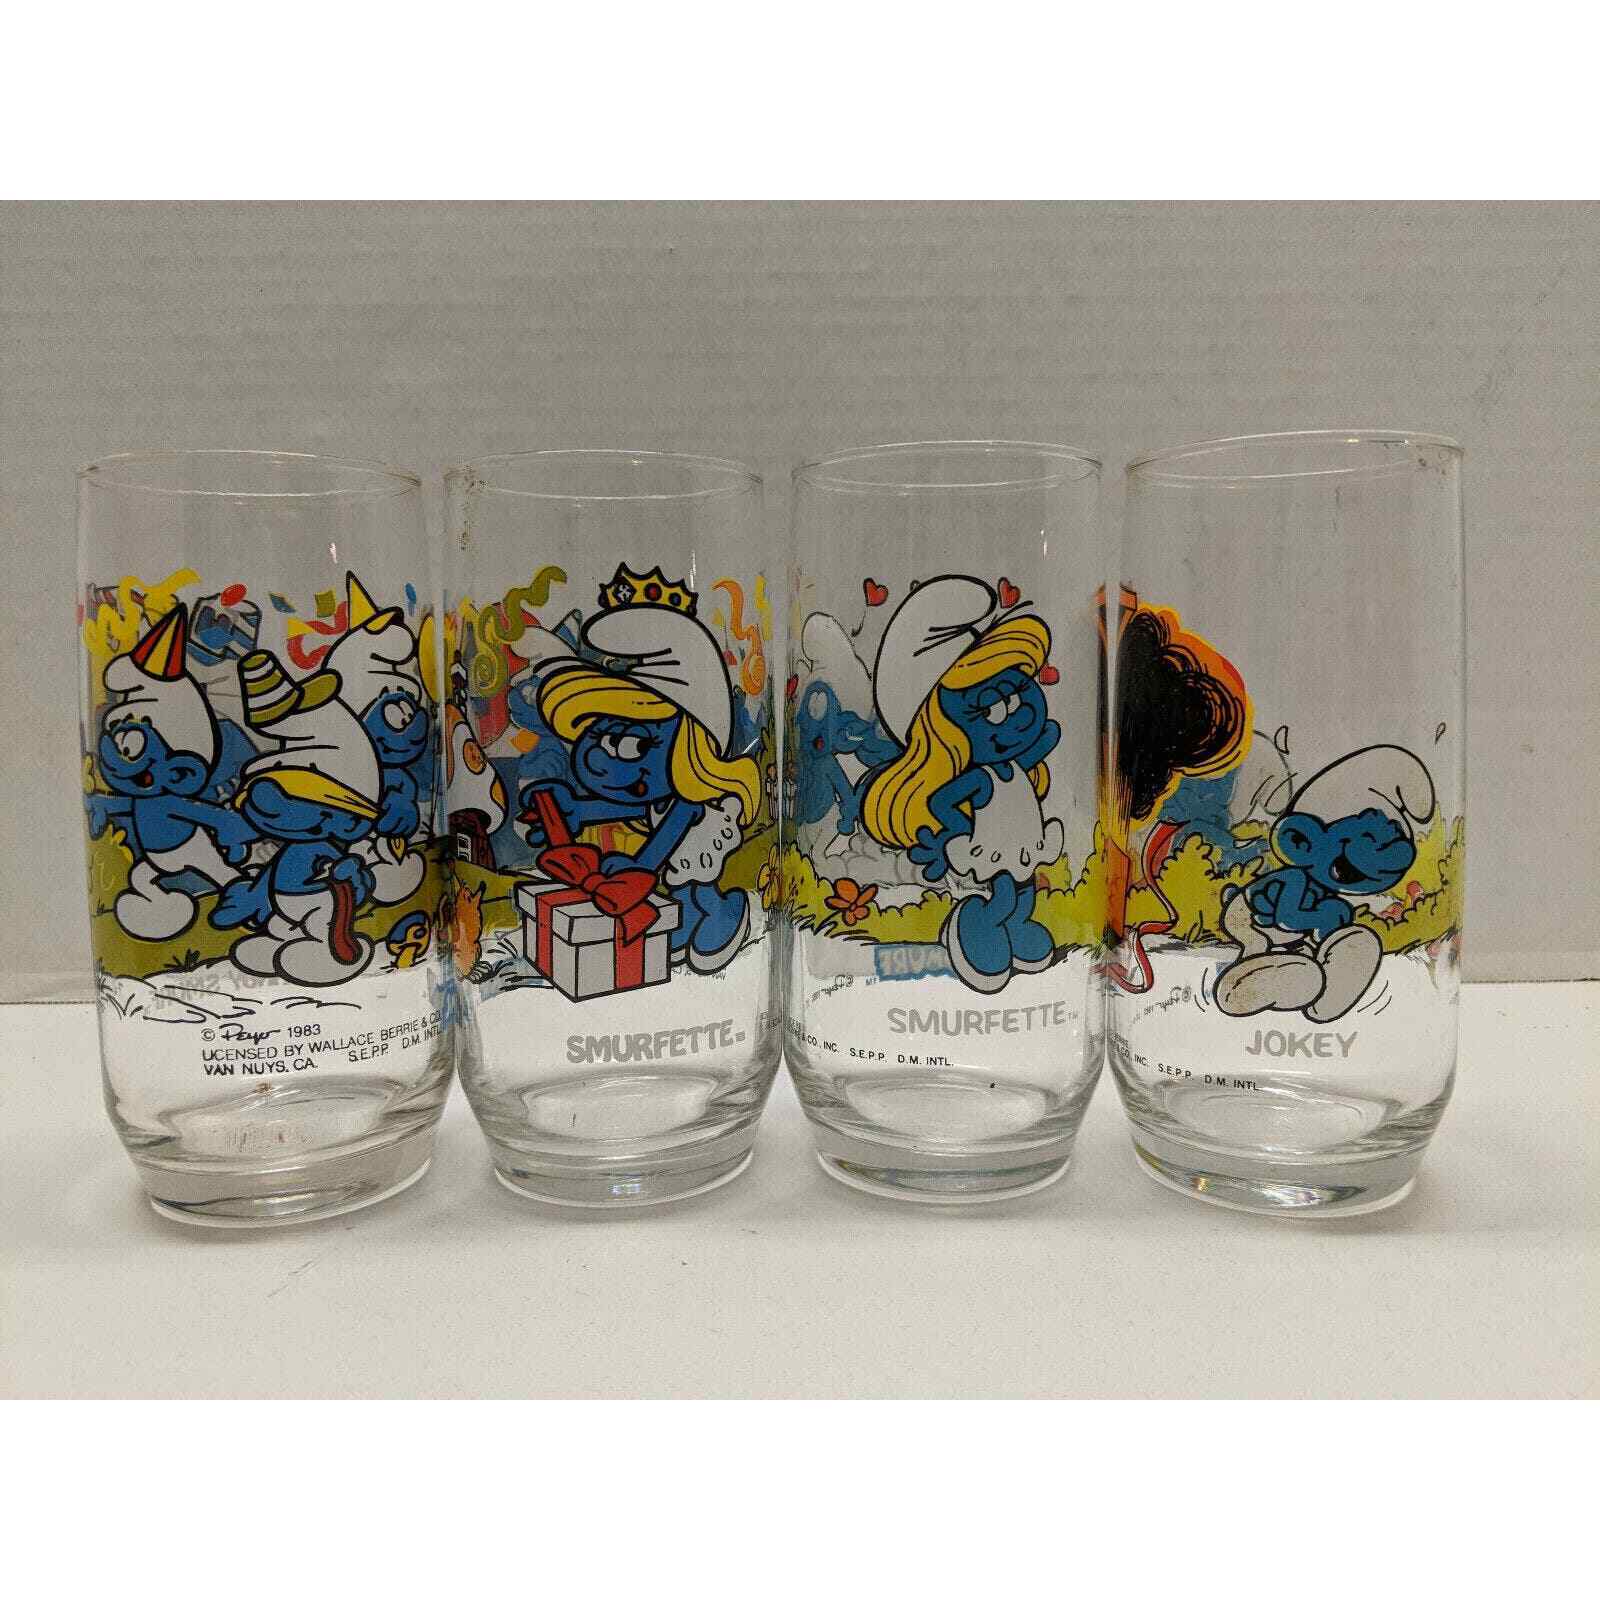 Lot of 4 Vintage Hardee's Peyo Smurf Glasses 1982/1983 Wallace Berry